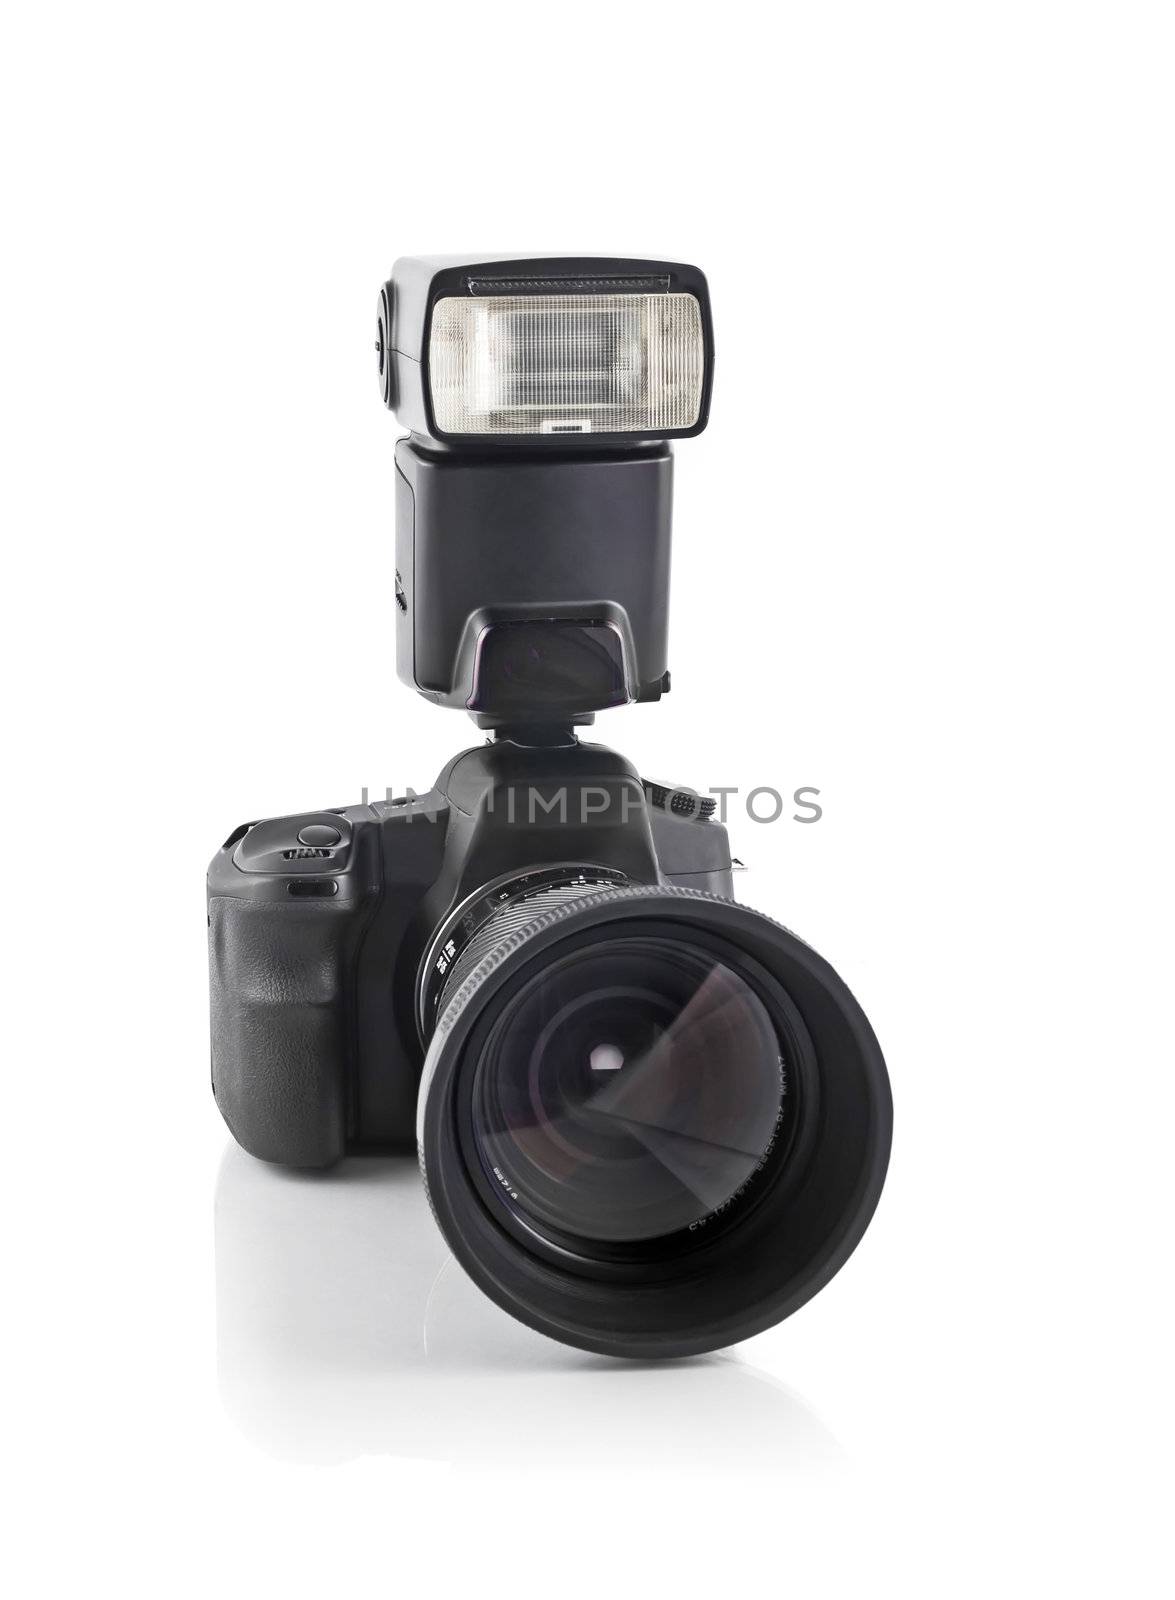 Professional DSLR camera with telephoto lens and flash by Arsgera